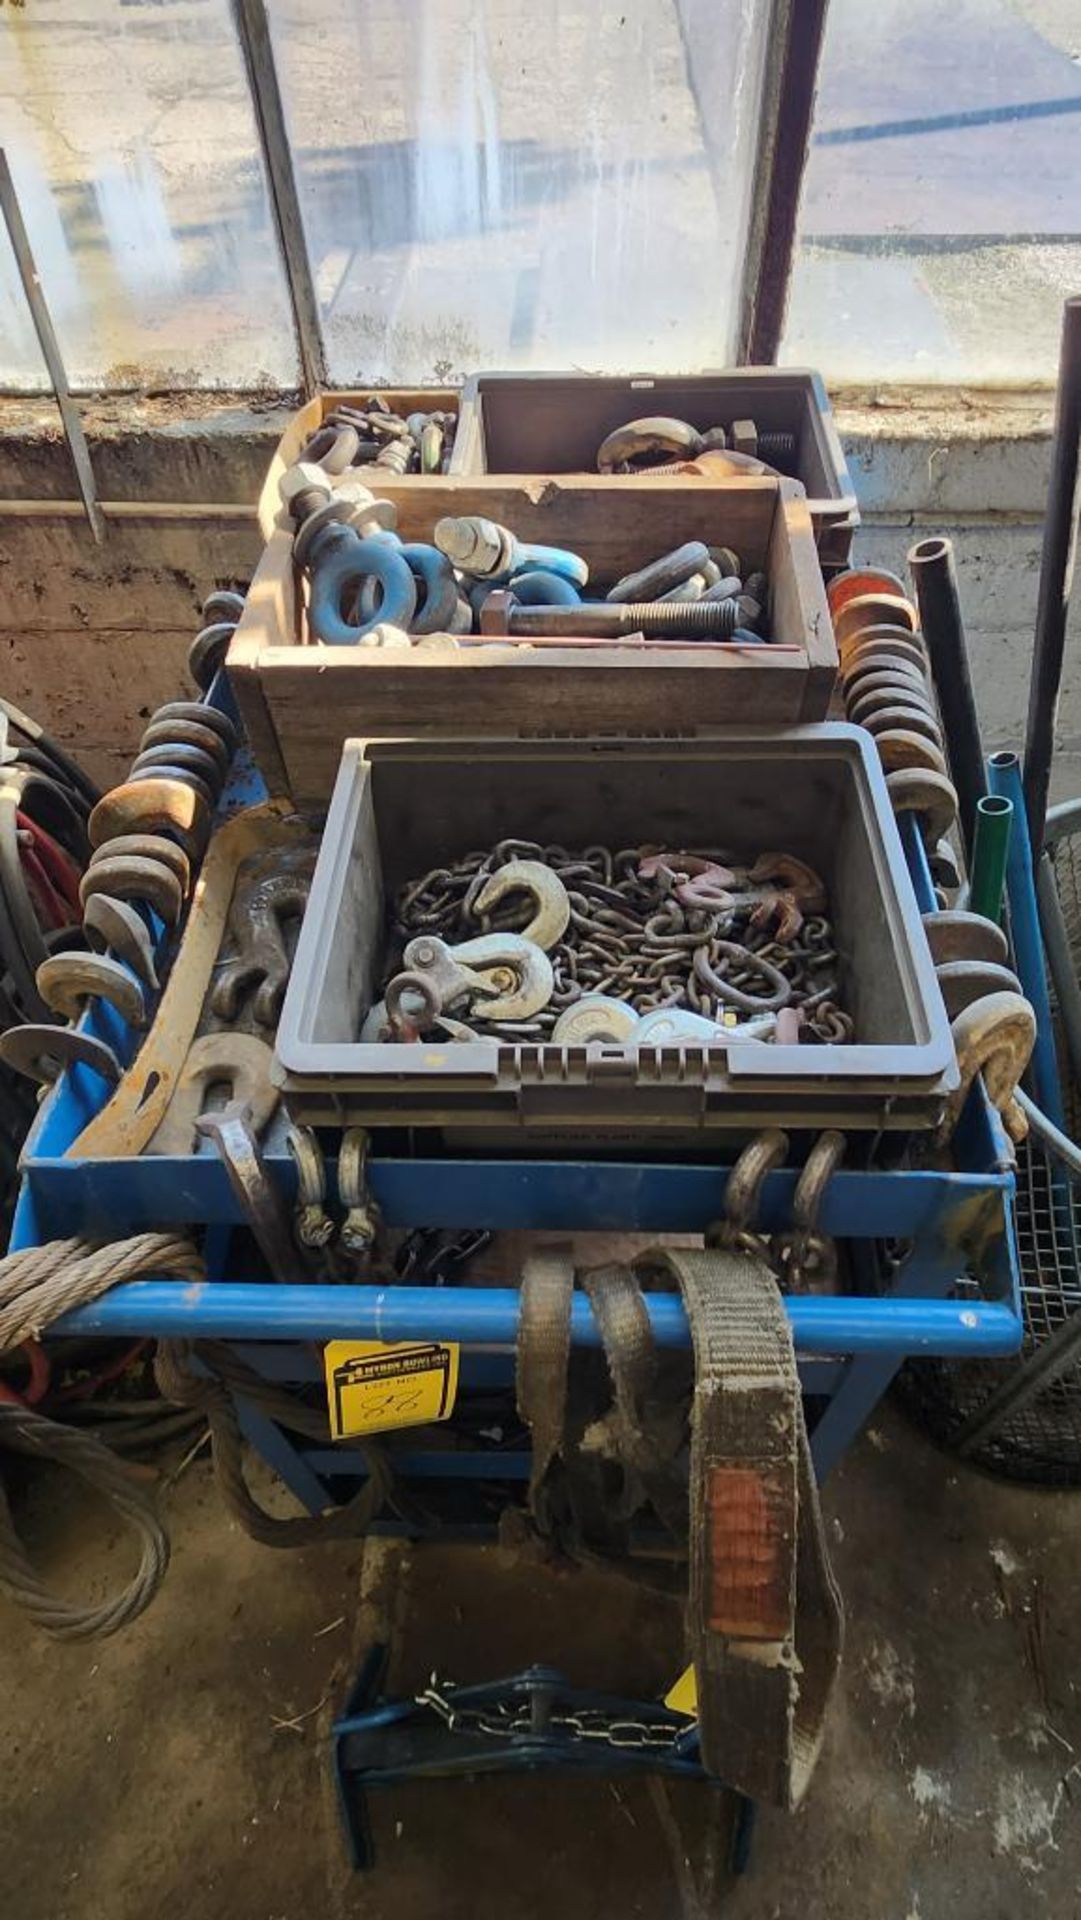 Steel Shop Cart w/ Content of Rigging Chains, Hooks, Eyebolts, Shackles, Rigging Harnesses - Image 5 of 5